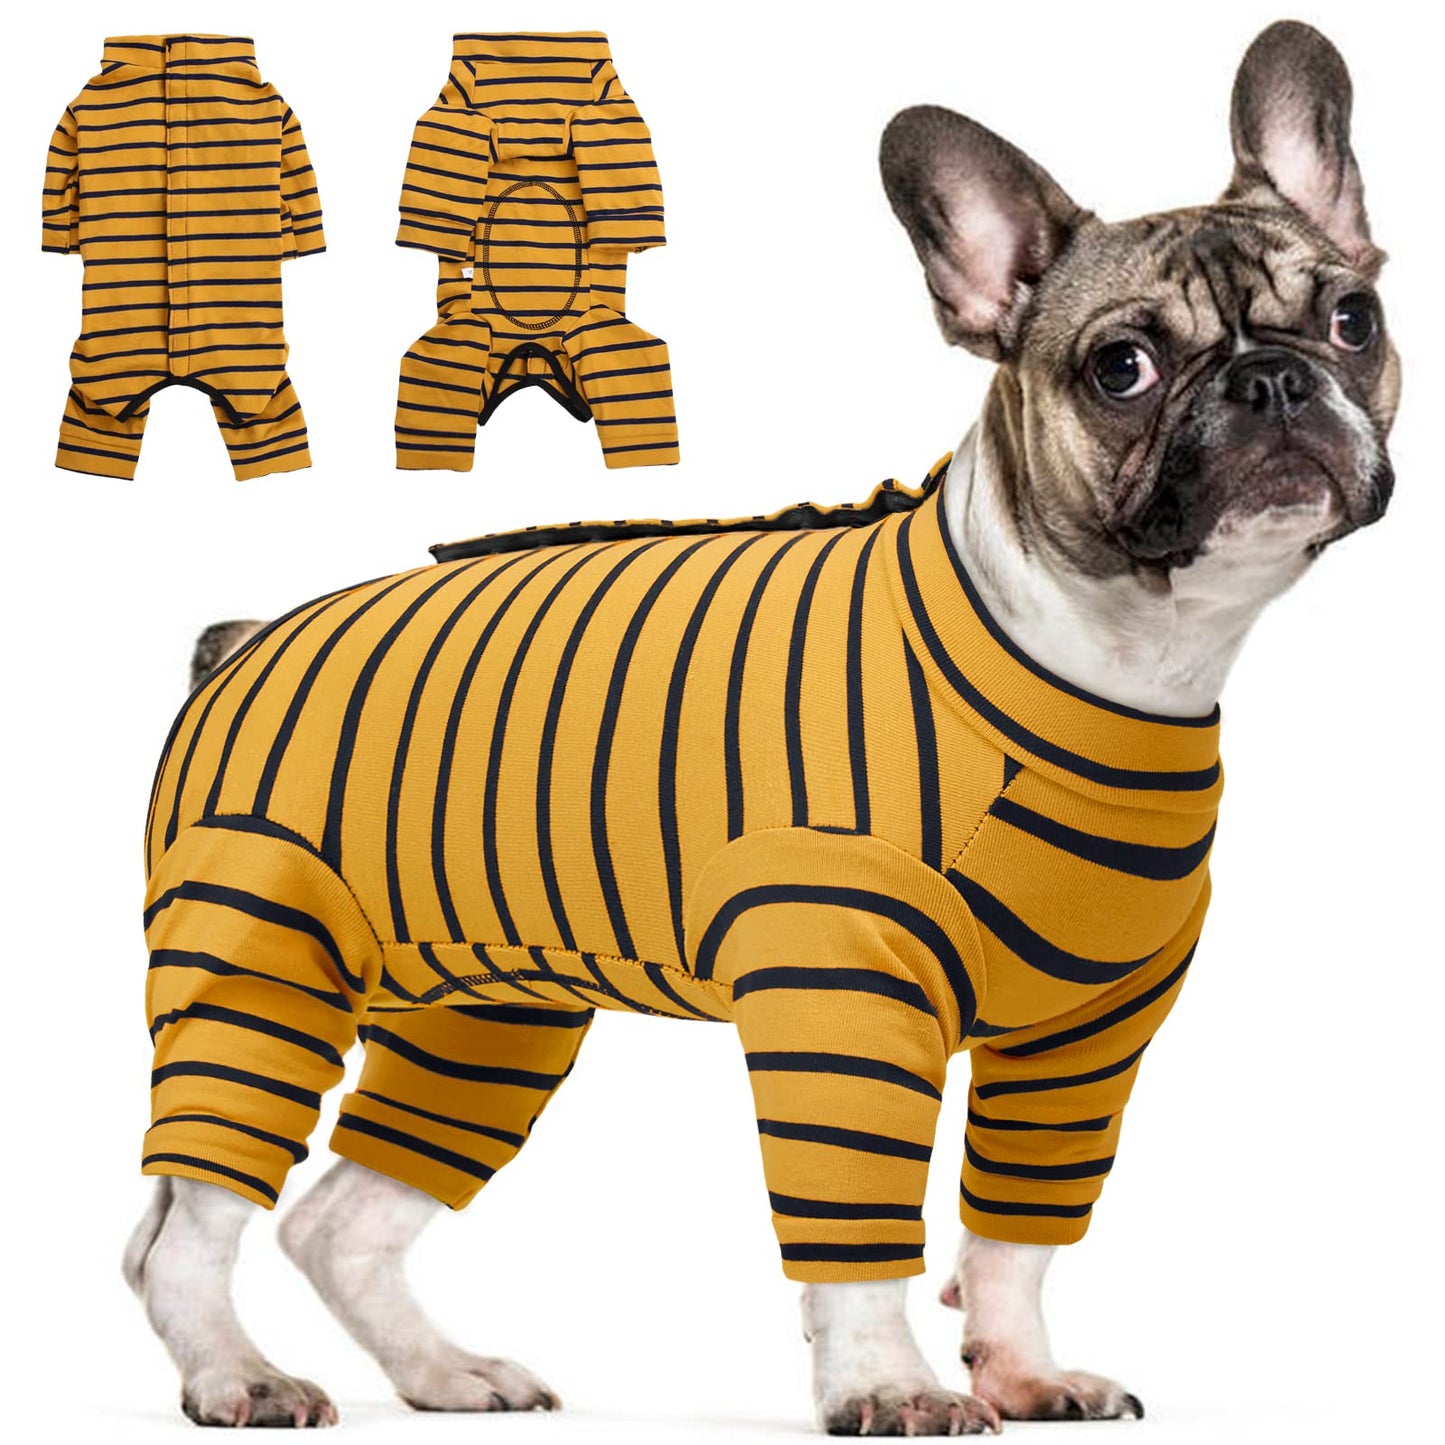 ROZKITCH Dog Onesie Recovery Suit, Puppy after Surgery Long Sleeve Shirt for Shedding Skin Disease Wound Protection, Pet Pajamas Anti-Licking Cone Alternative for Small Medium Cats Dogs Animals & Pet Supplies > Pet Supplies > Dog Supplies > Dog Apparel ROZKITCH L Yellow 